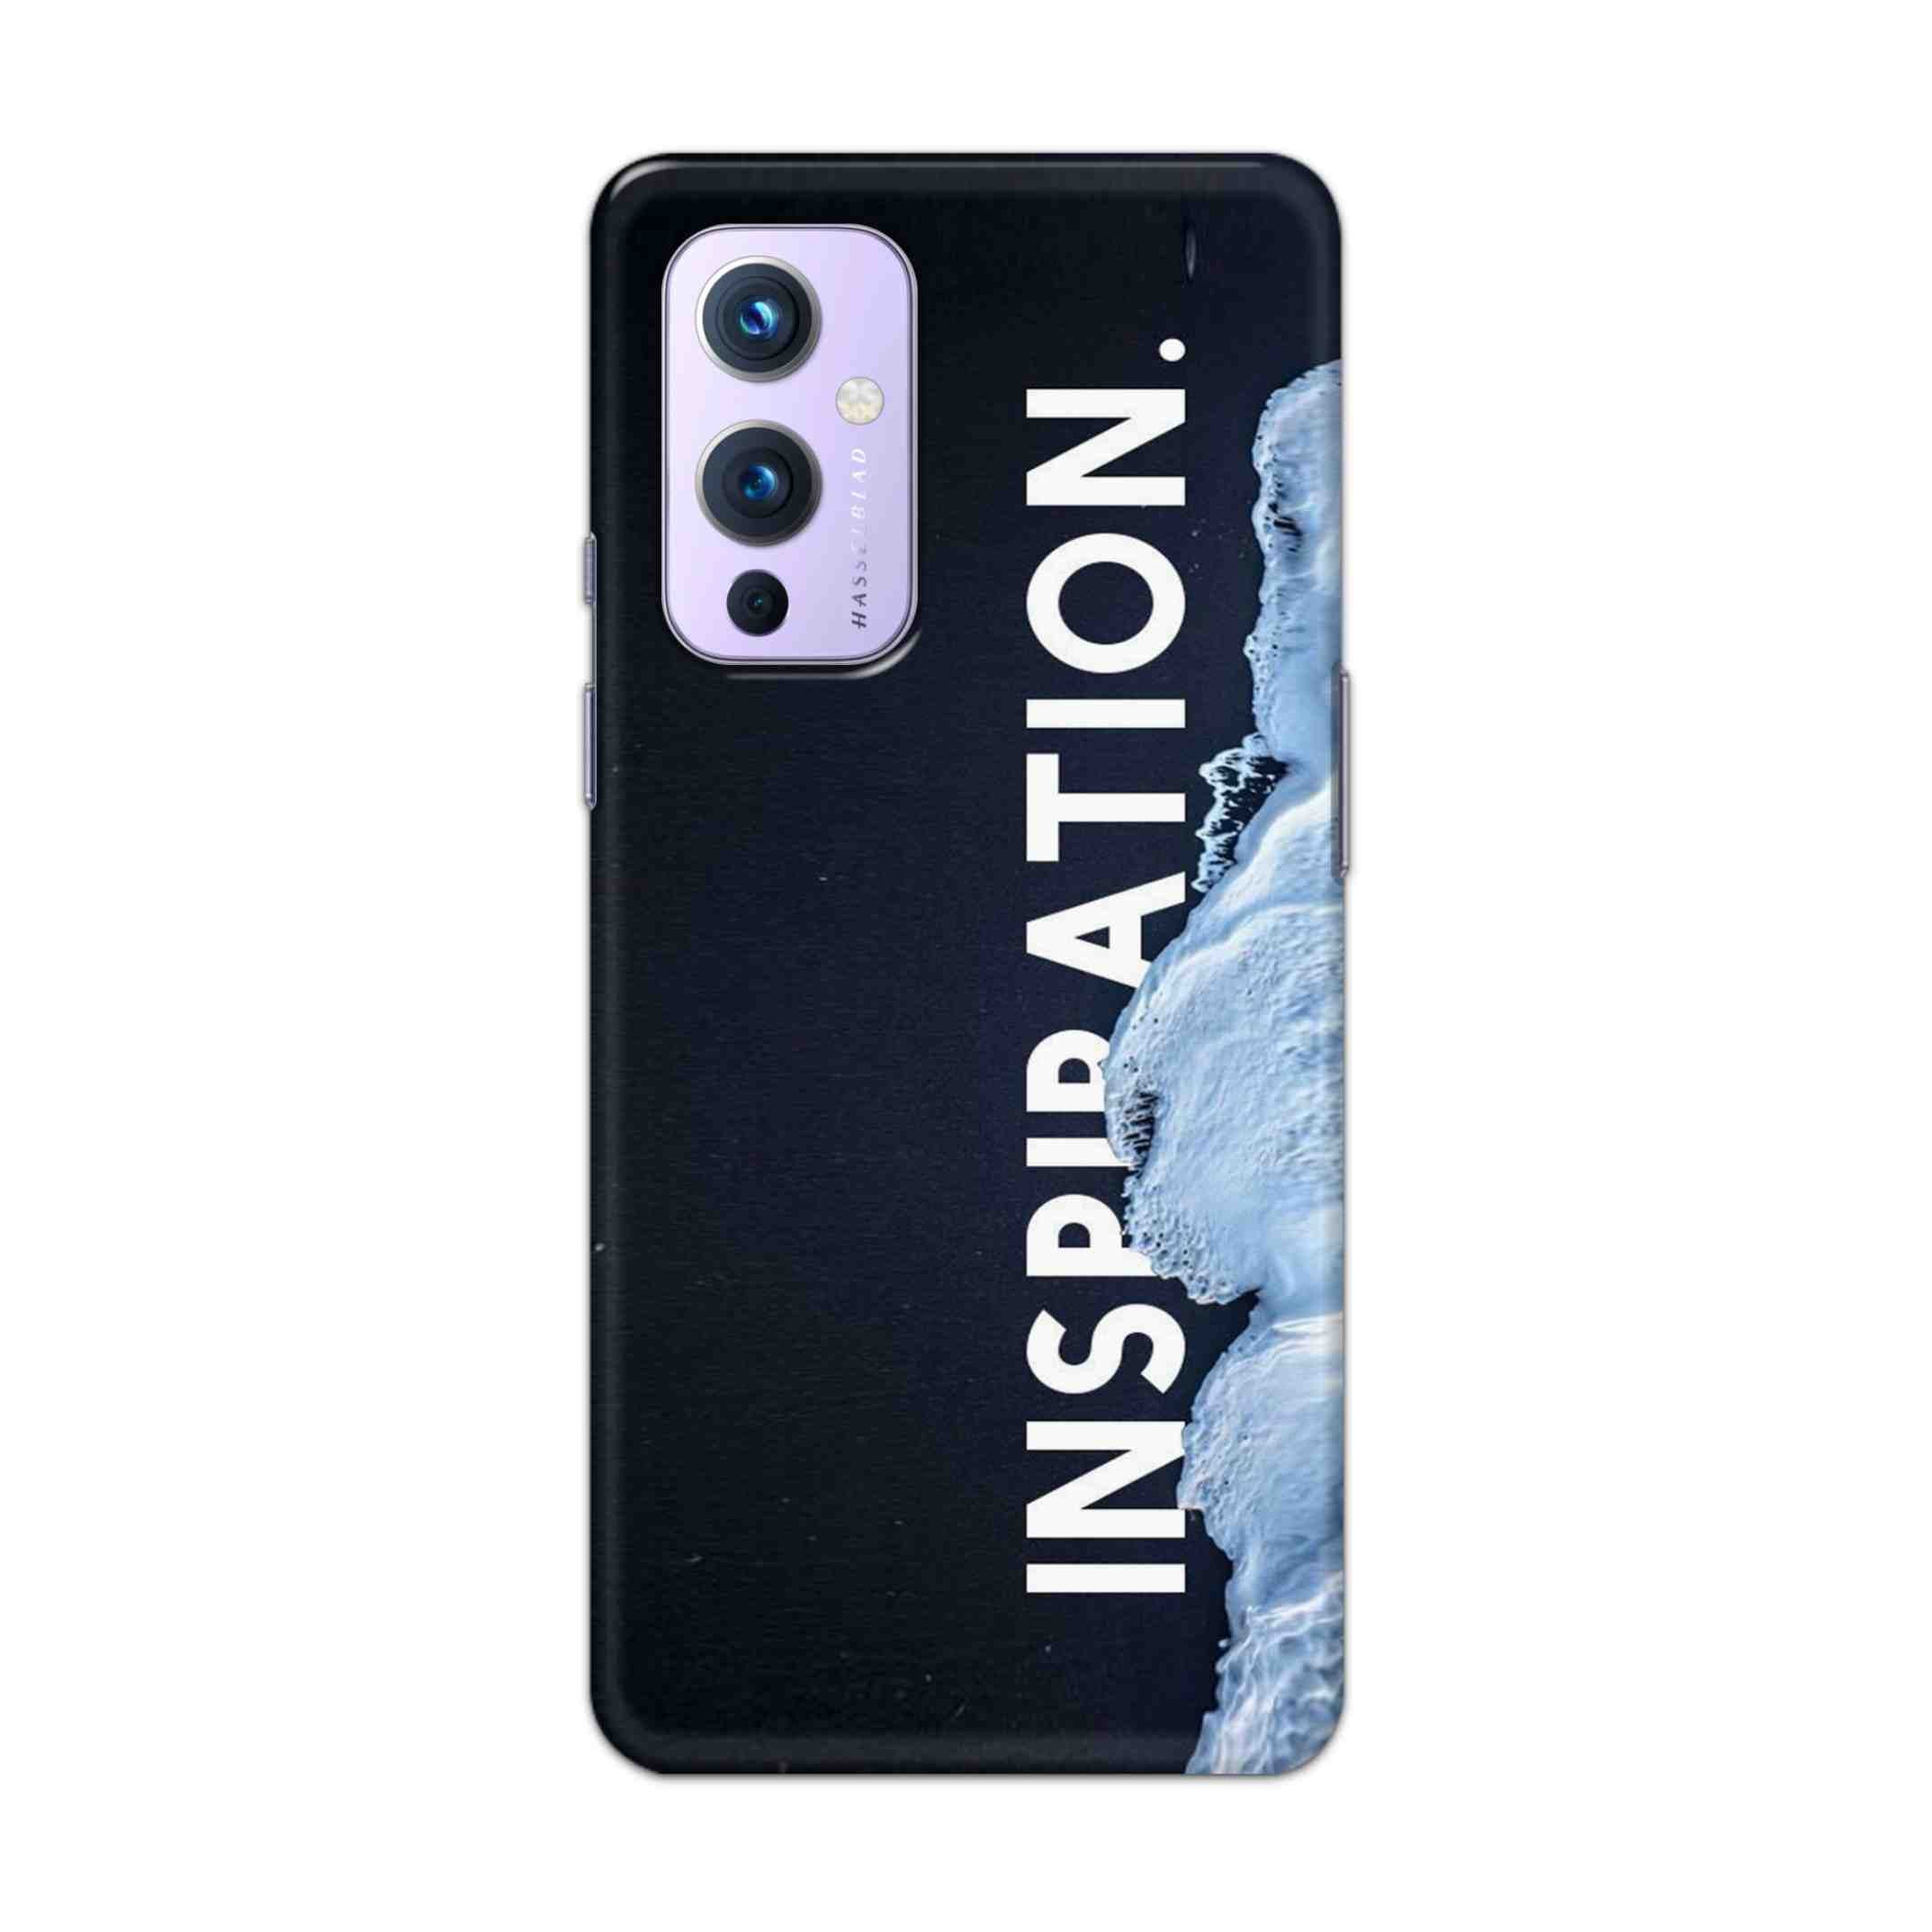 Buy Inspiration Hard Back Mobile Phone Case Cover For OnePlus 9 Online